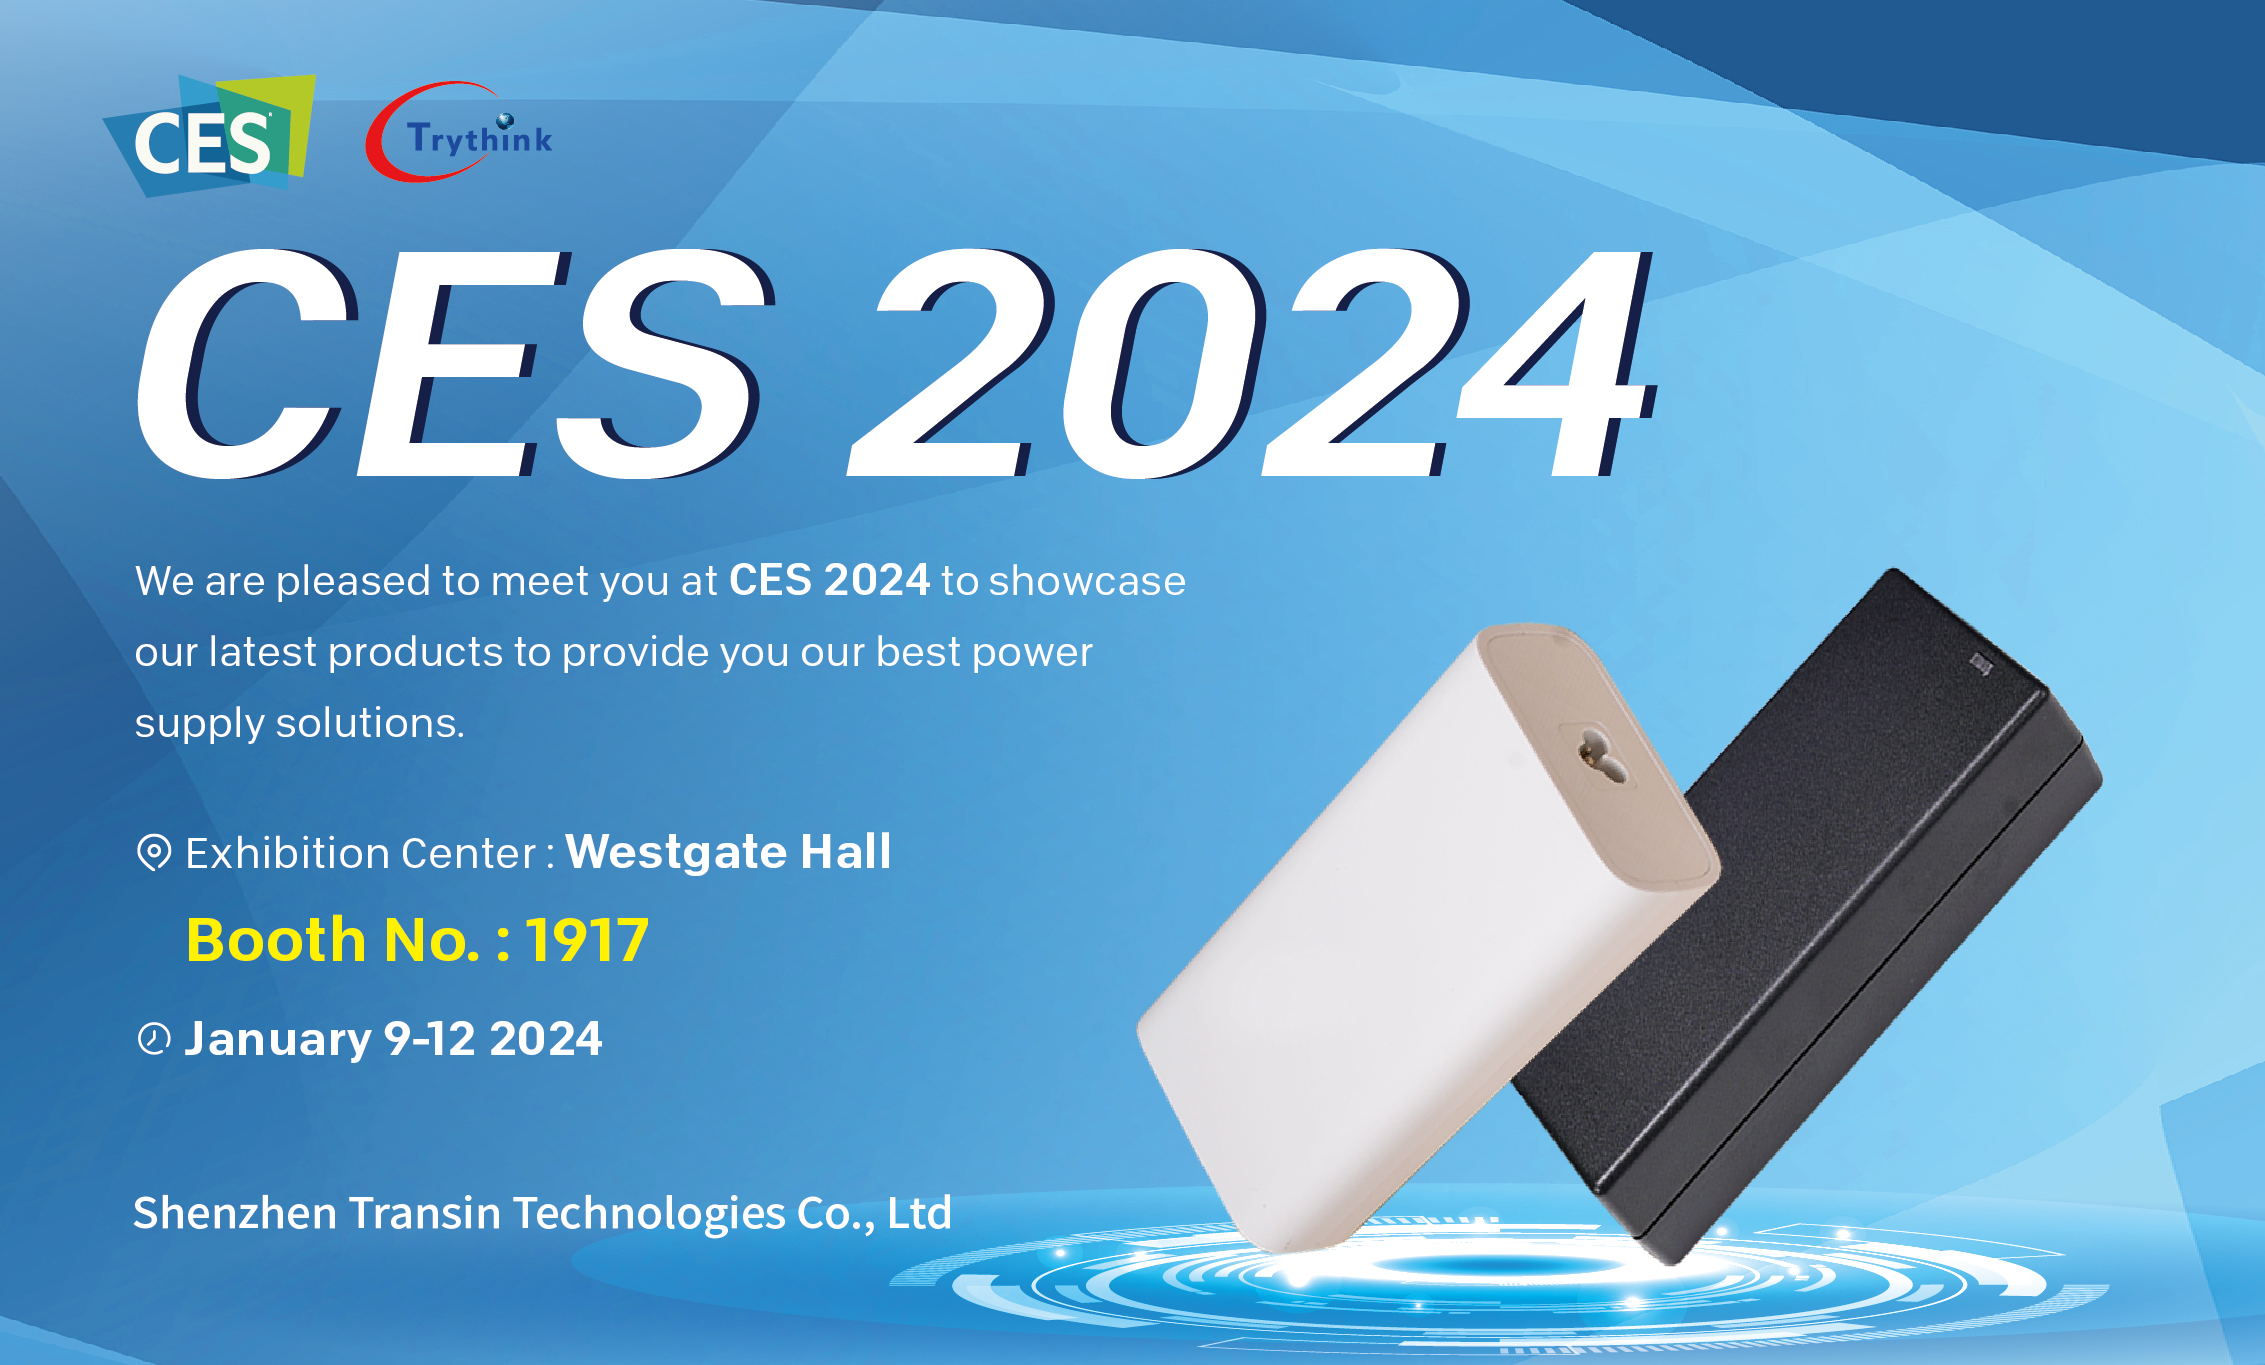 See you in CES 2024